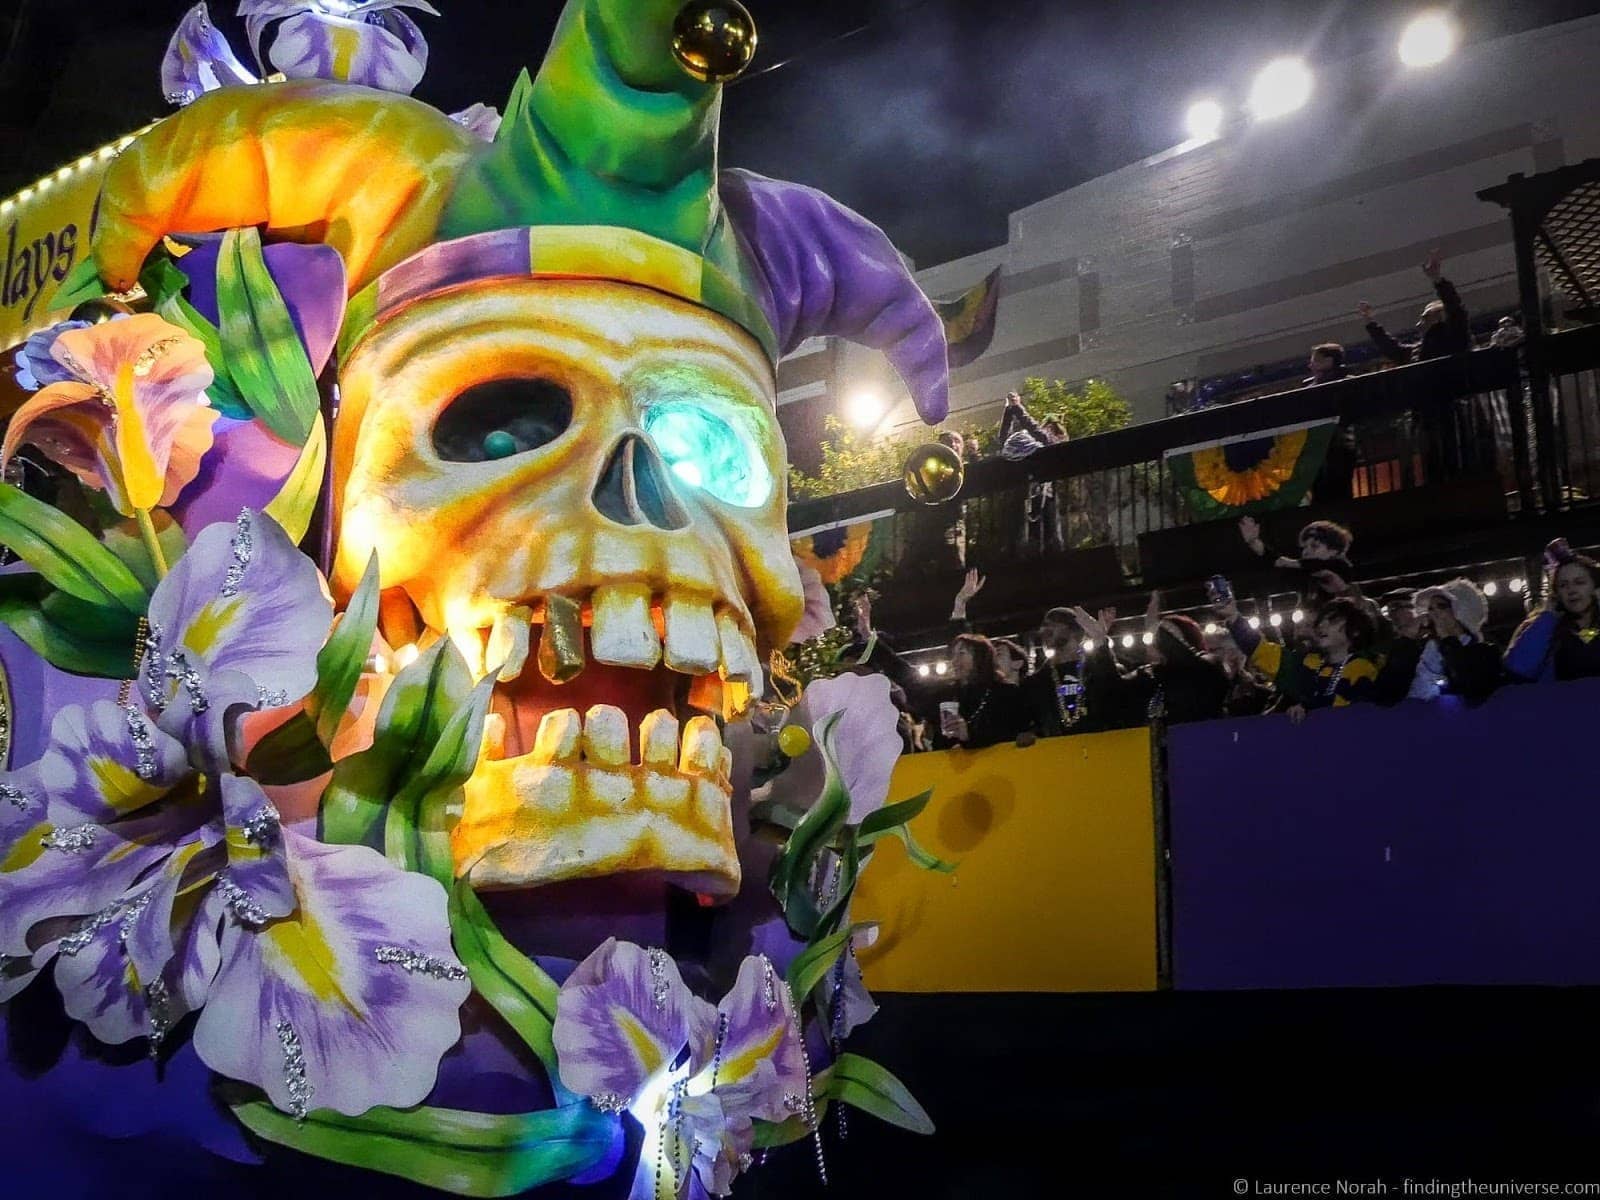 What's Booming: It's Pardi Gras Time in Ashland